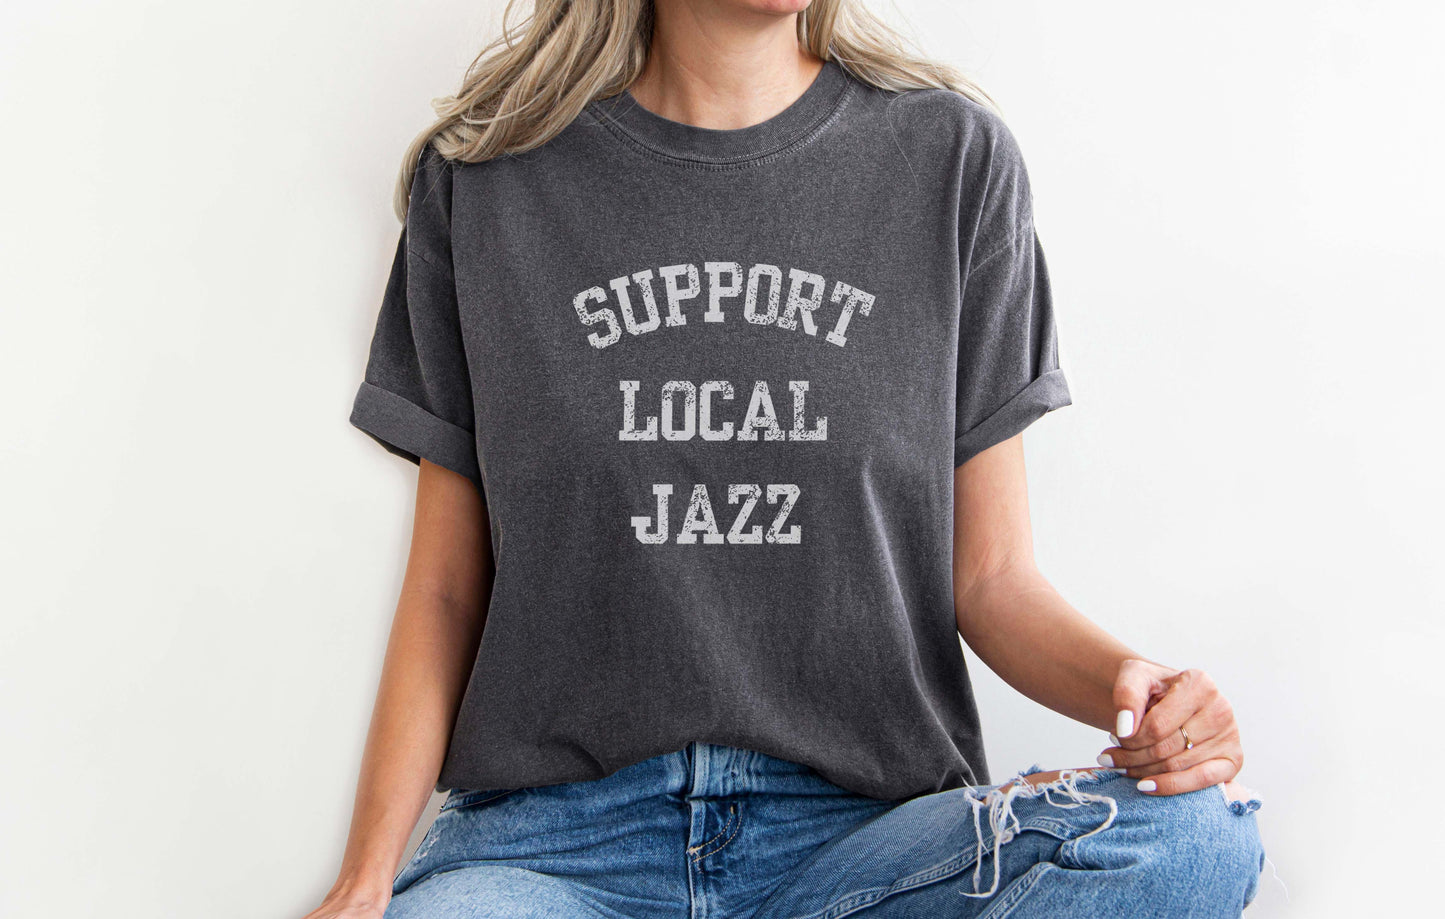 Support Local Jazz Shirt I Comfort Colors Brand